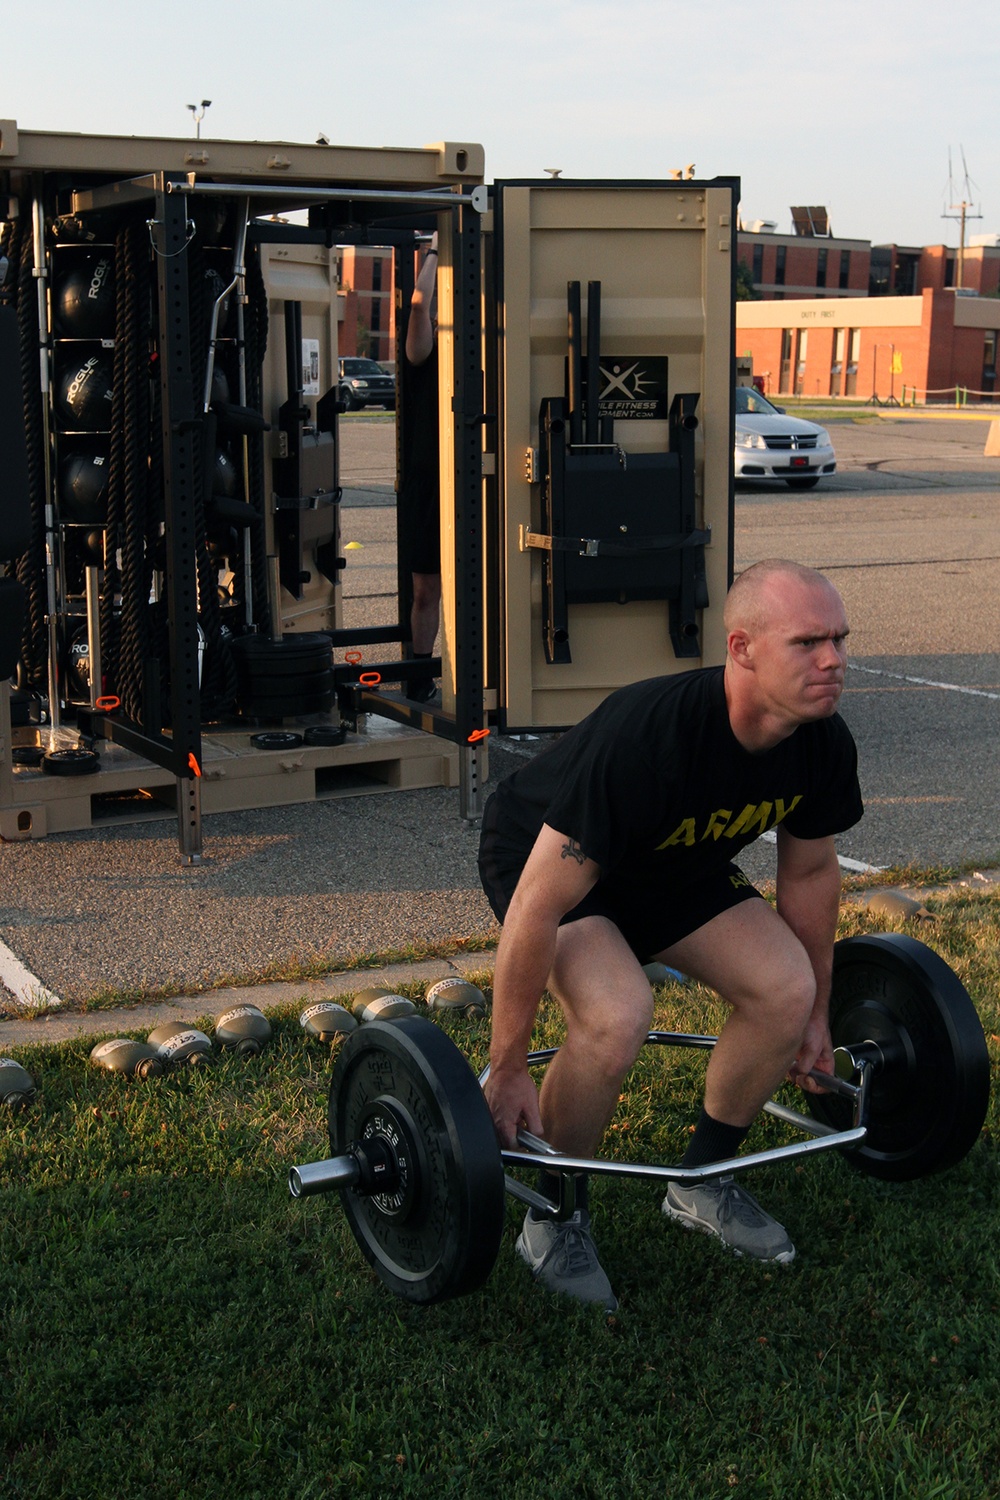 The 97th Military Police Battalion use portable for PT to better prepare themselves for the new Army Combat Fitness Test, slated to begin October 2020.